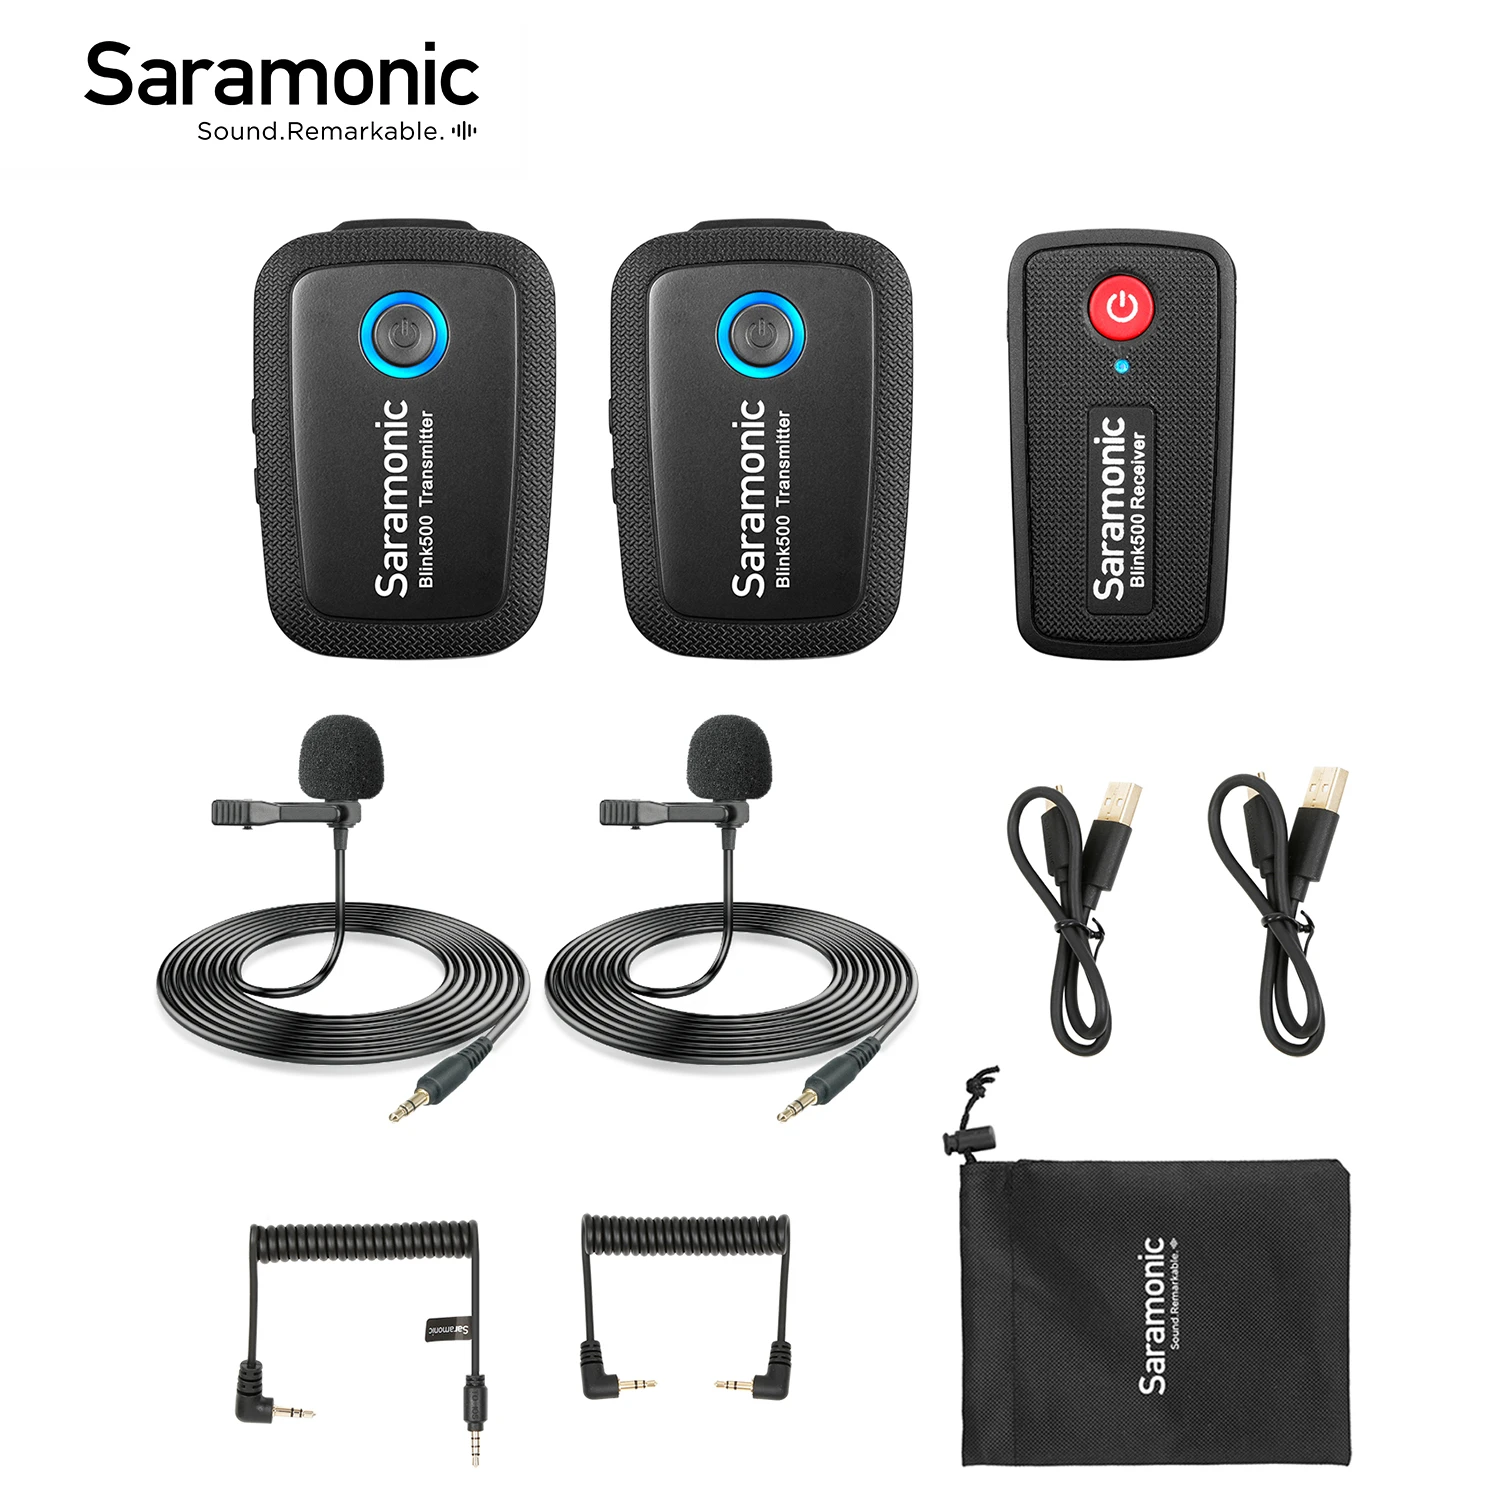 Saramonic Blink500 B2 Condenser Wireless Lavalier Microphone for PC Mobile  Phone Android iPhone Live Streaming Lapel Microphone|Microphones| -  AliExpress